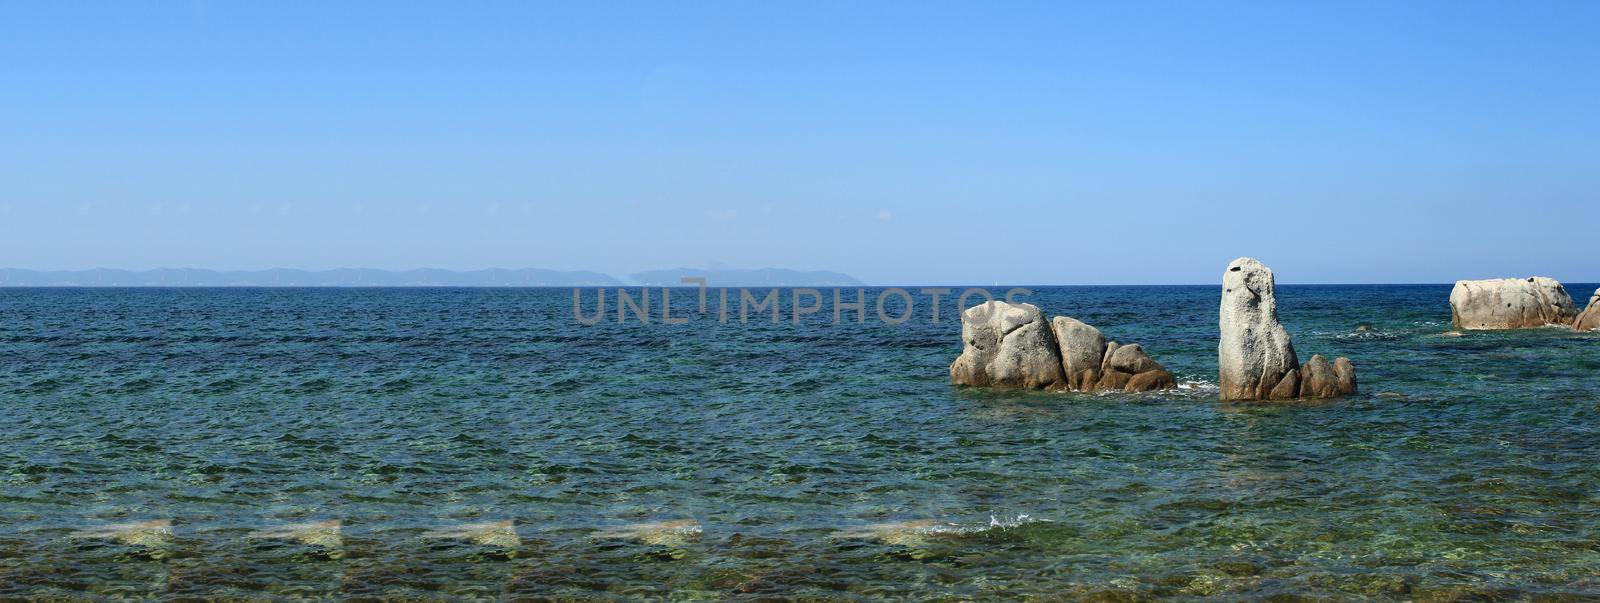 Sardinia beach landscape banner image with copy space